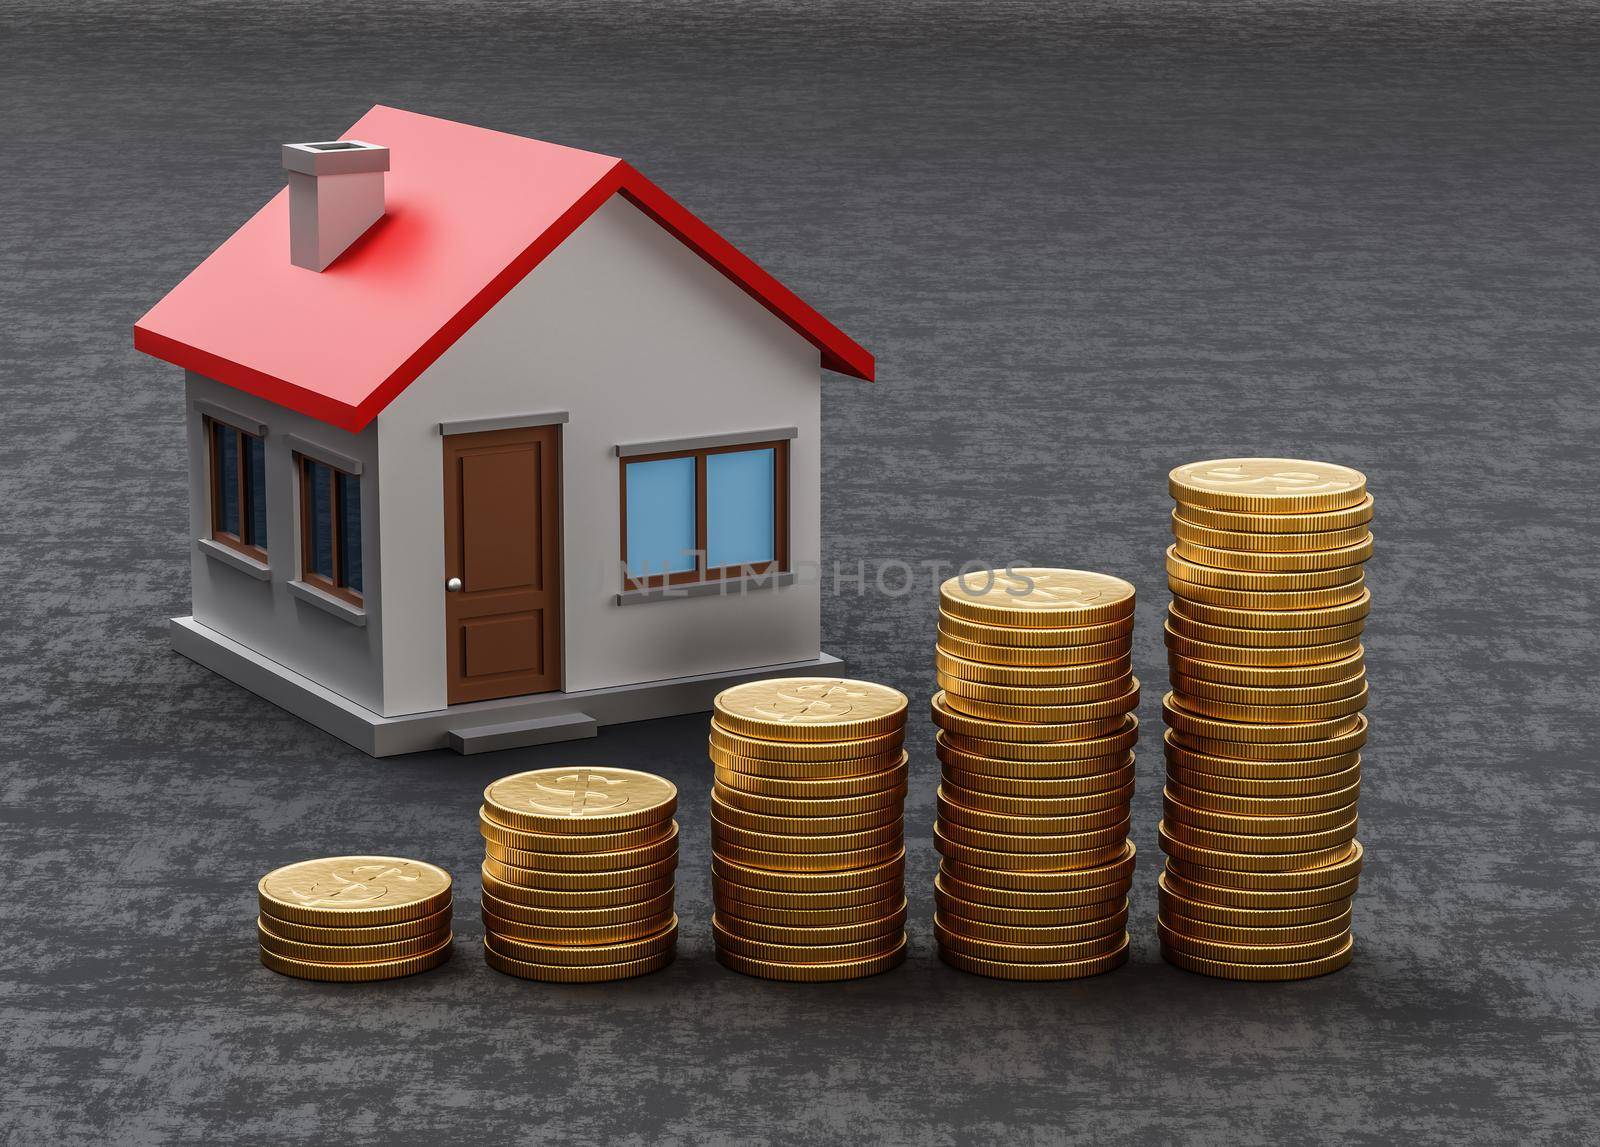 Rising Heaps of Golden Coins on Dark Background with House 3D Render Illustration